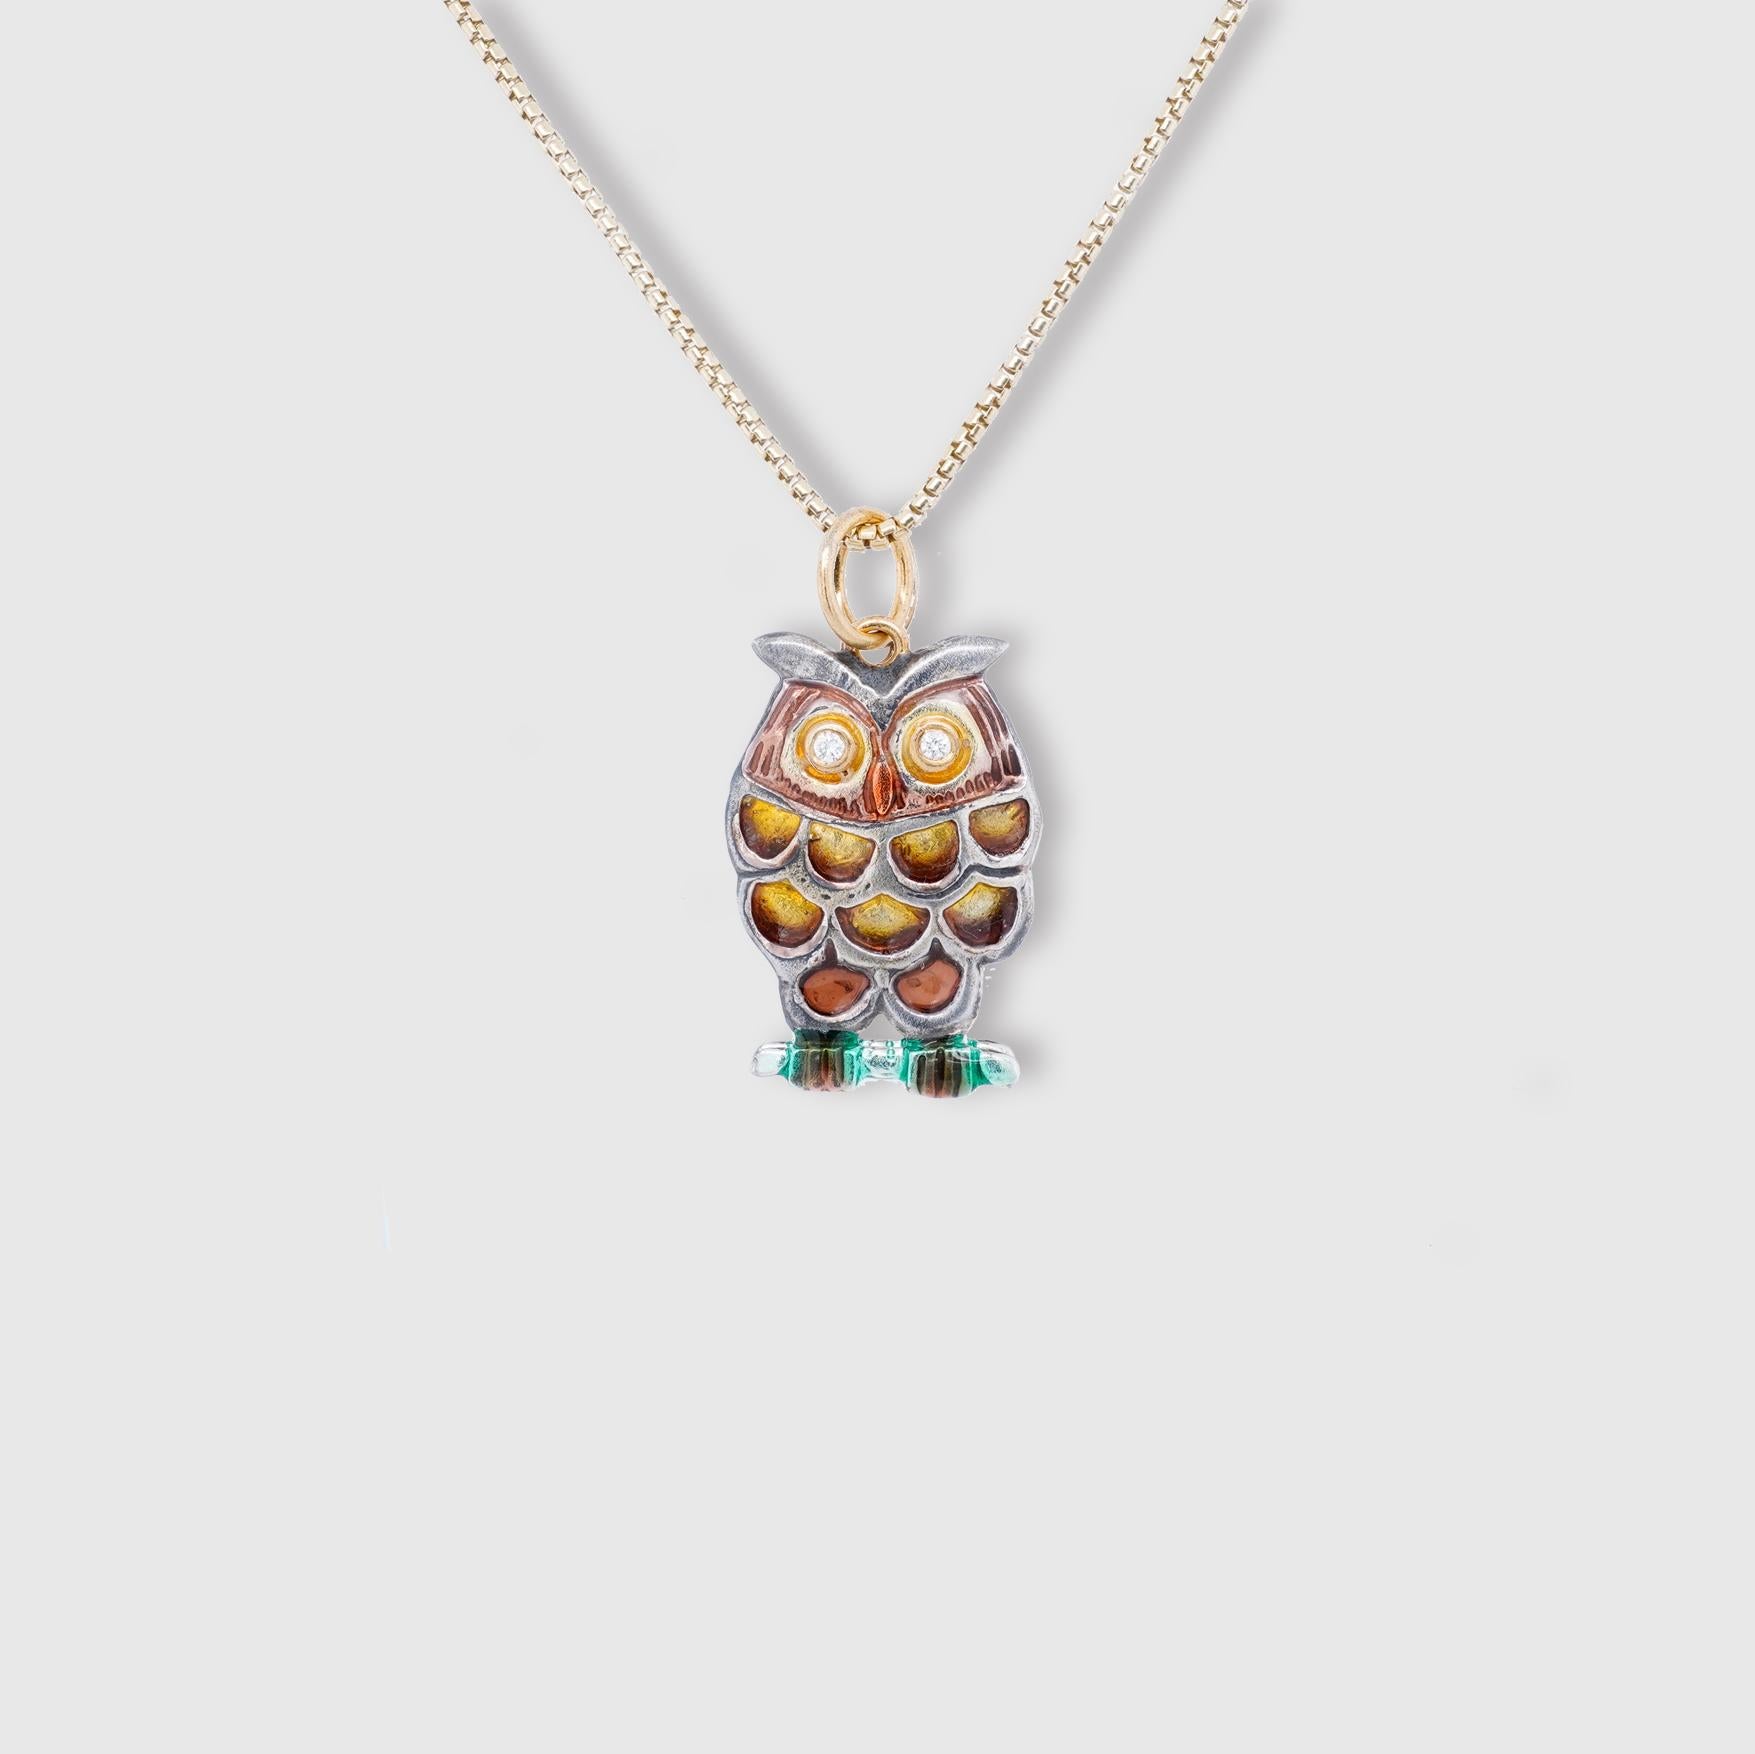 Contemporary Multi-Colored Enameled Owl Charm with Diamond Eyes, Pendant Necklace, 24kt Gold 